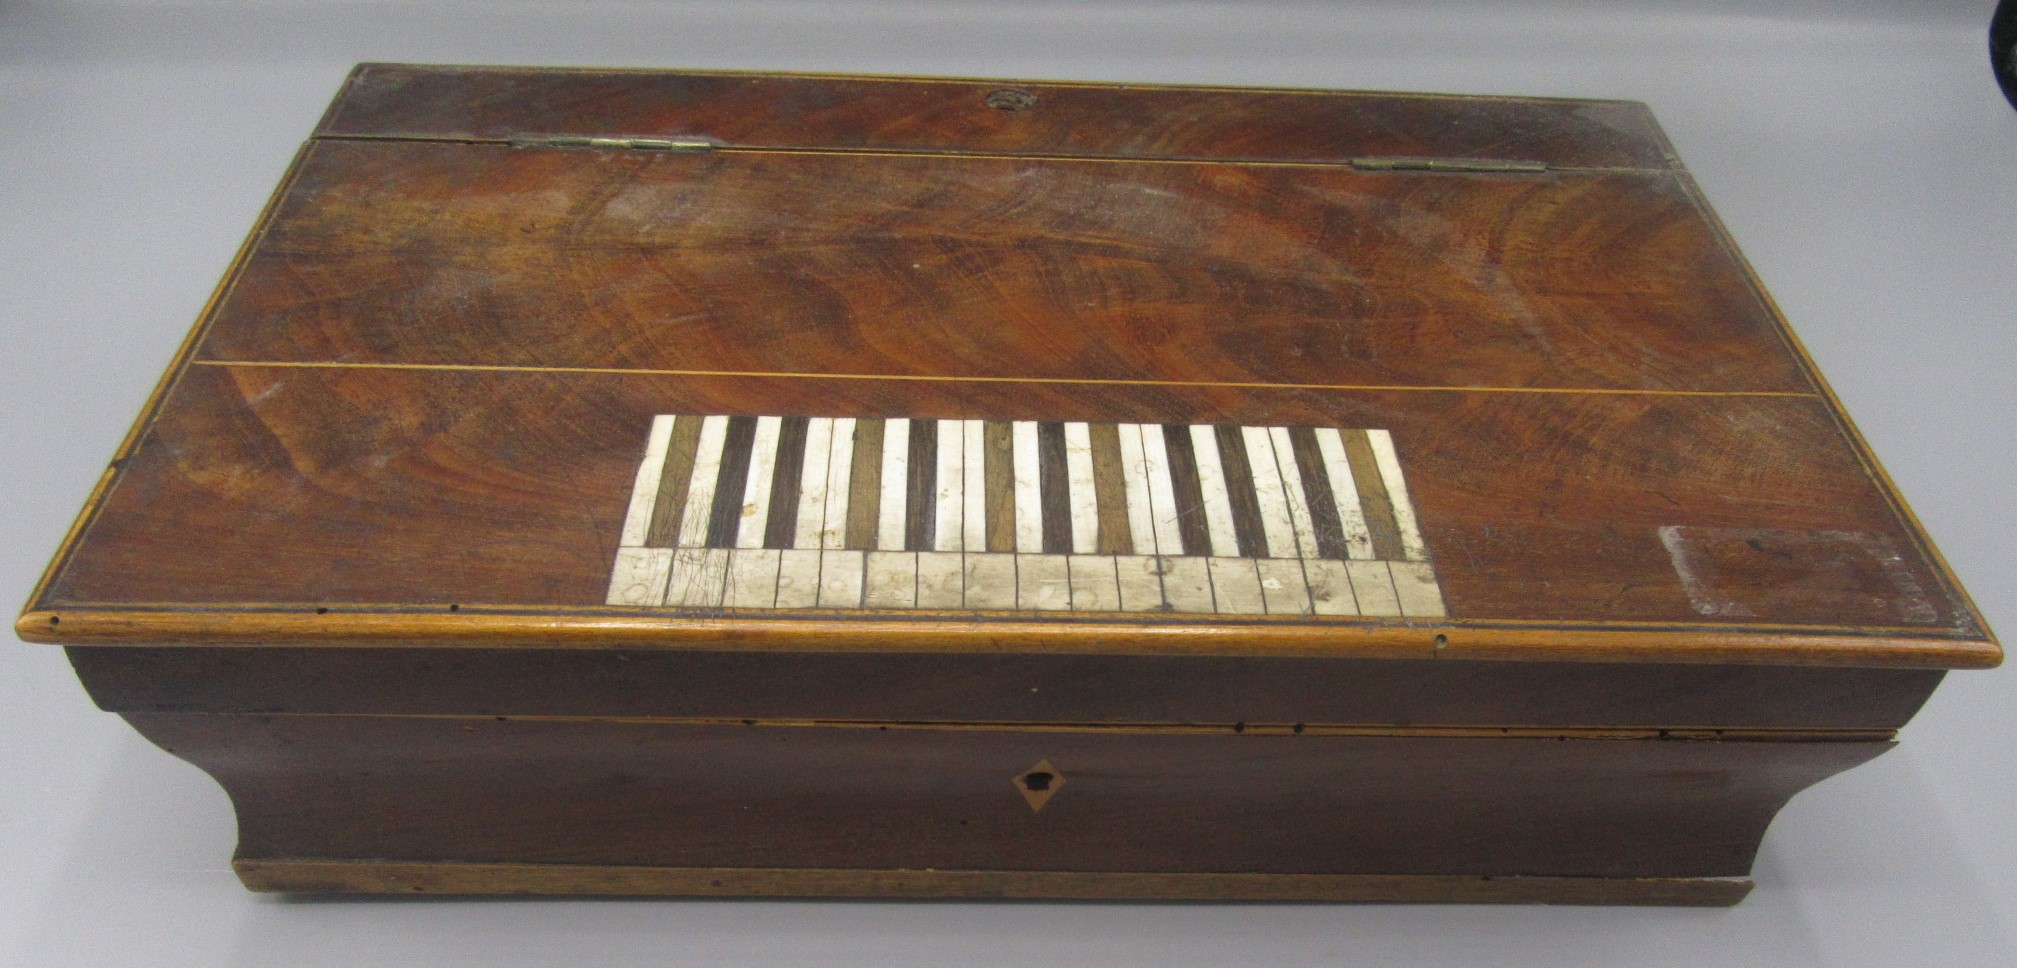 A Palais Royale inlaid mahogany musical sewing box, 19th century, in the form of a square piano,